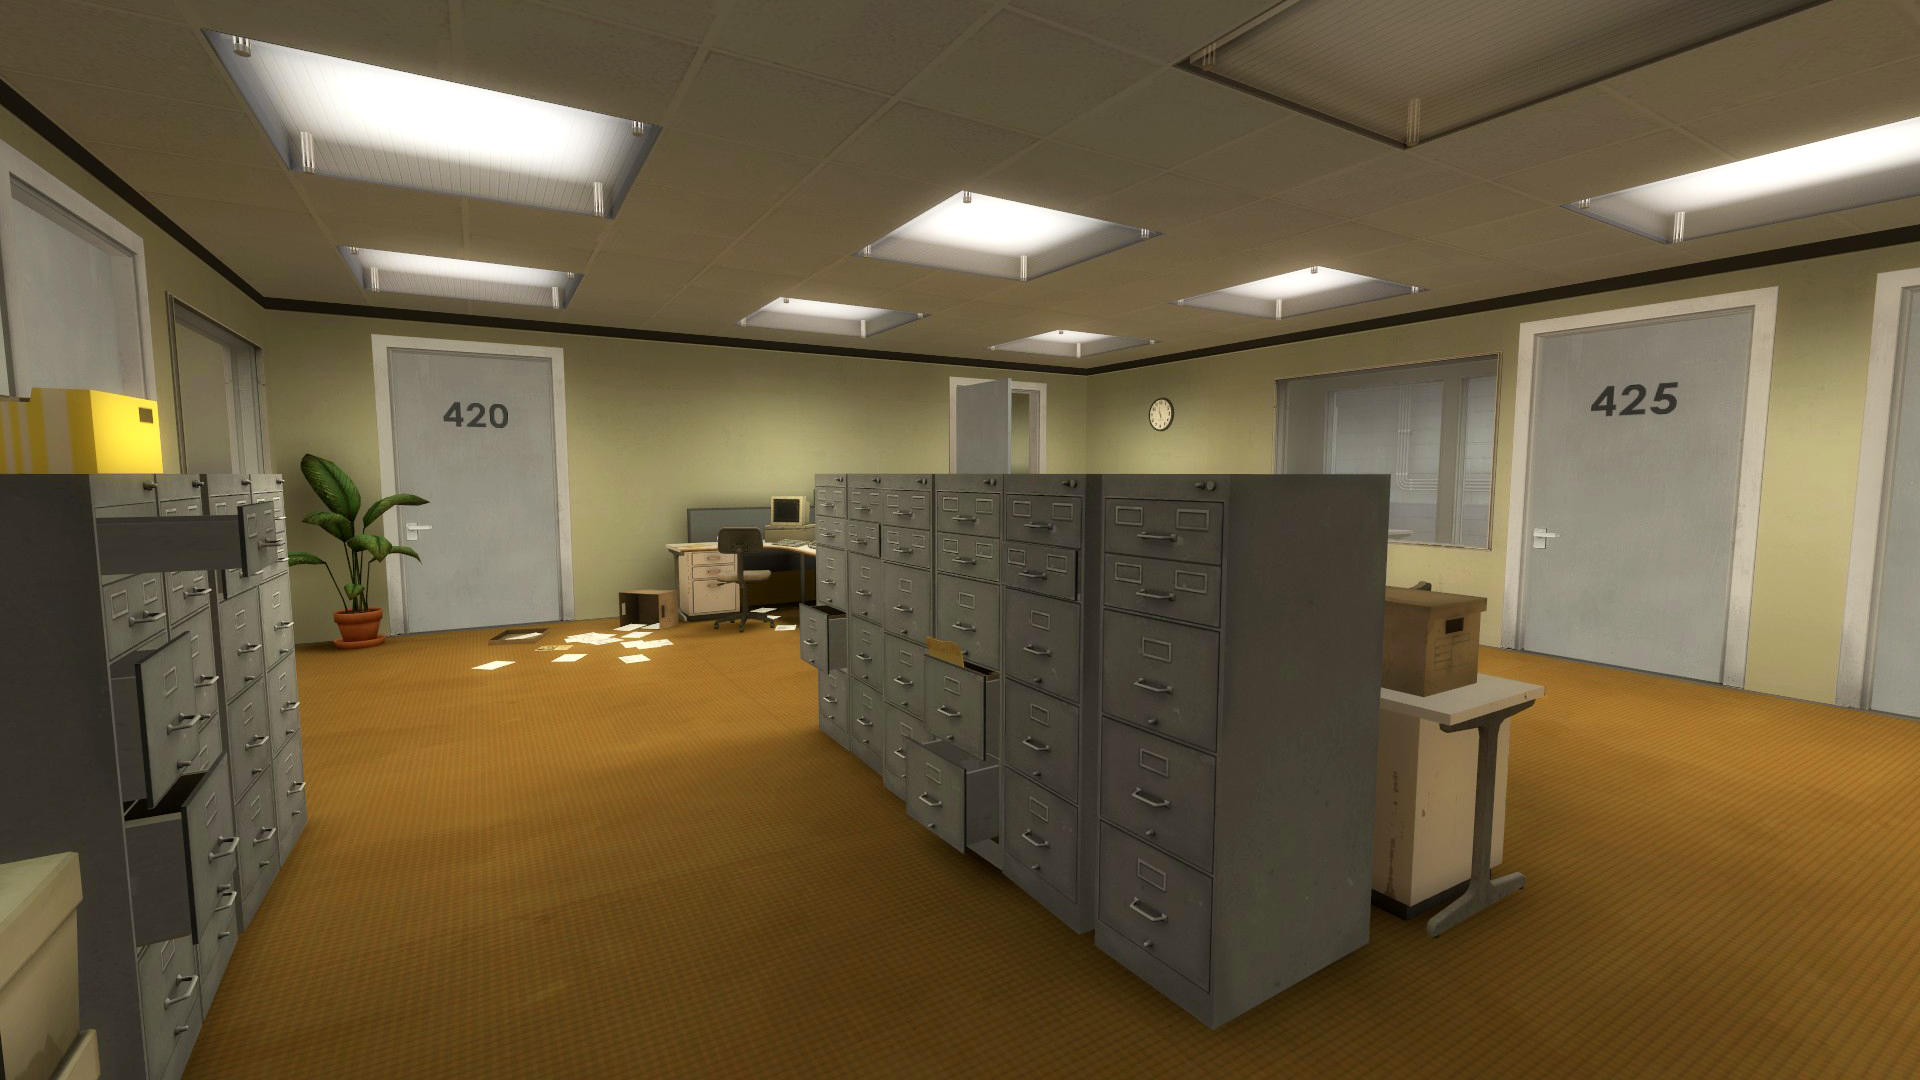 The Stanley Parable screenshot game